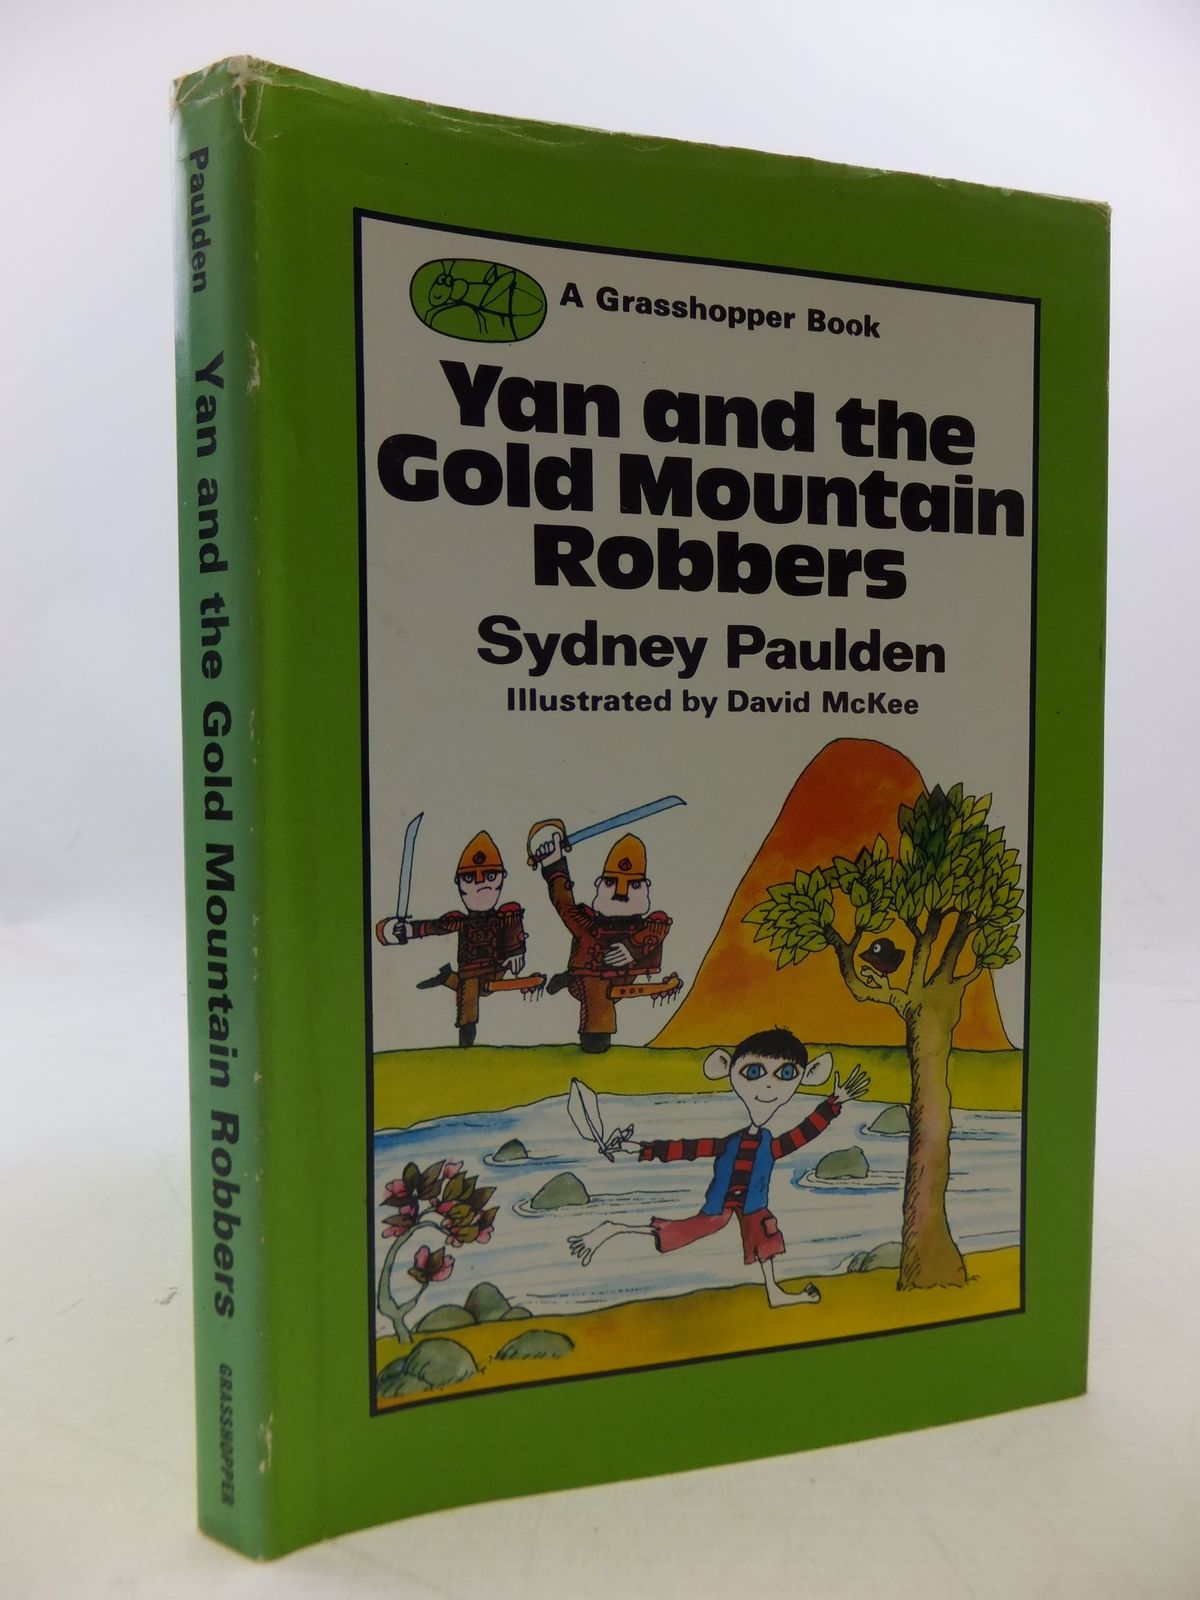 Photo of YAN AND THE GOLD MOUNTAIN ROBBERS written by Paulden, Sydney illustrated by McKee, David published by Grasshopper, Abelard-Schuman (STOCK CODE: 1710142)  for sale by Stella & Rose's Books